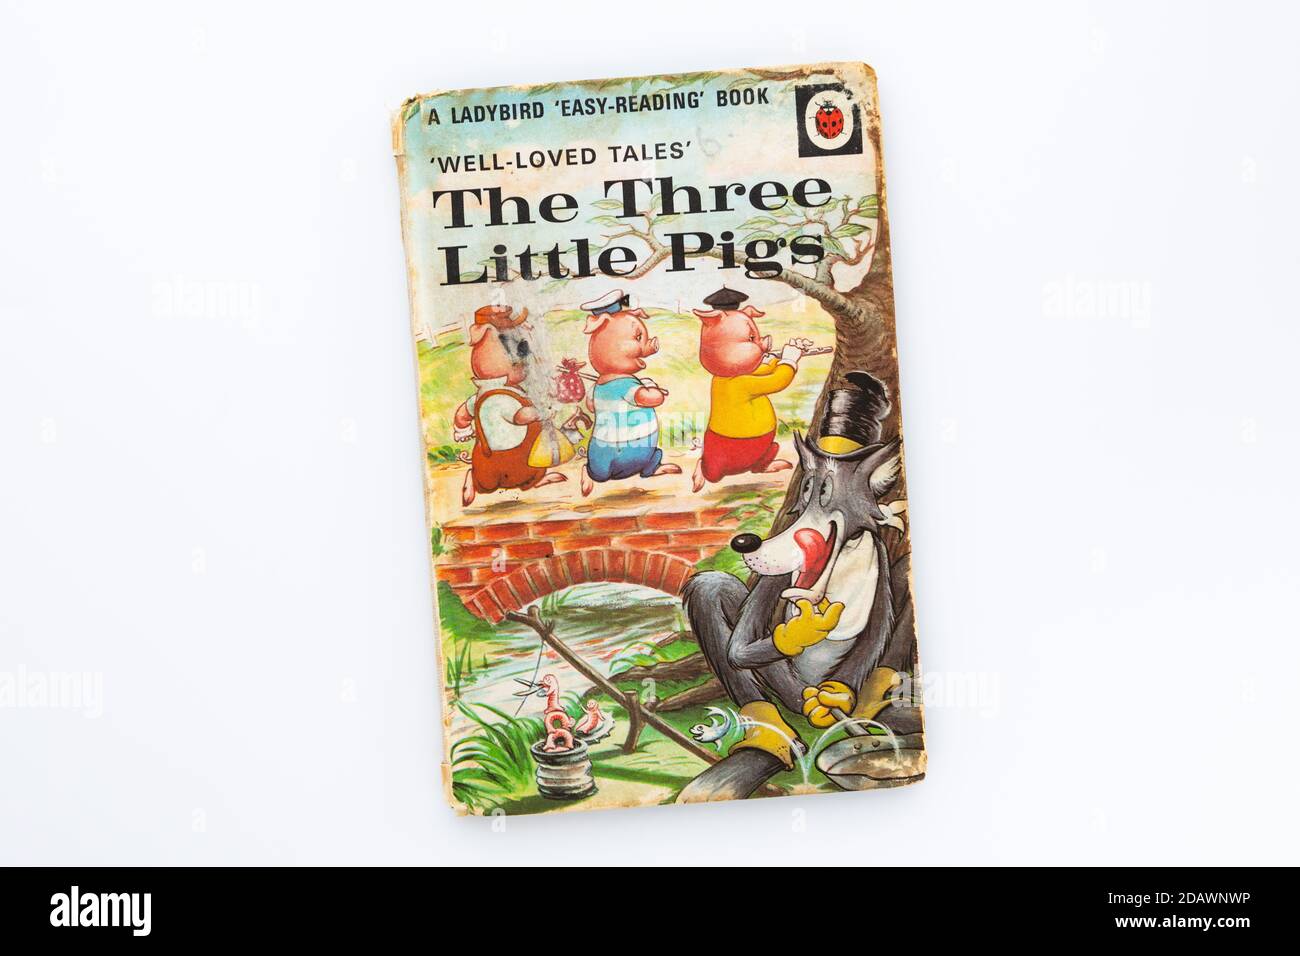 The Three Little Pigs - vintage copy of Ladybird 'Easy Reading Book' Stock Photo